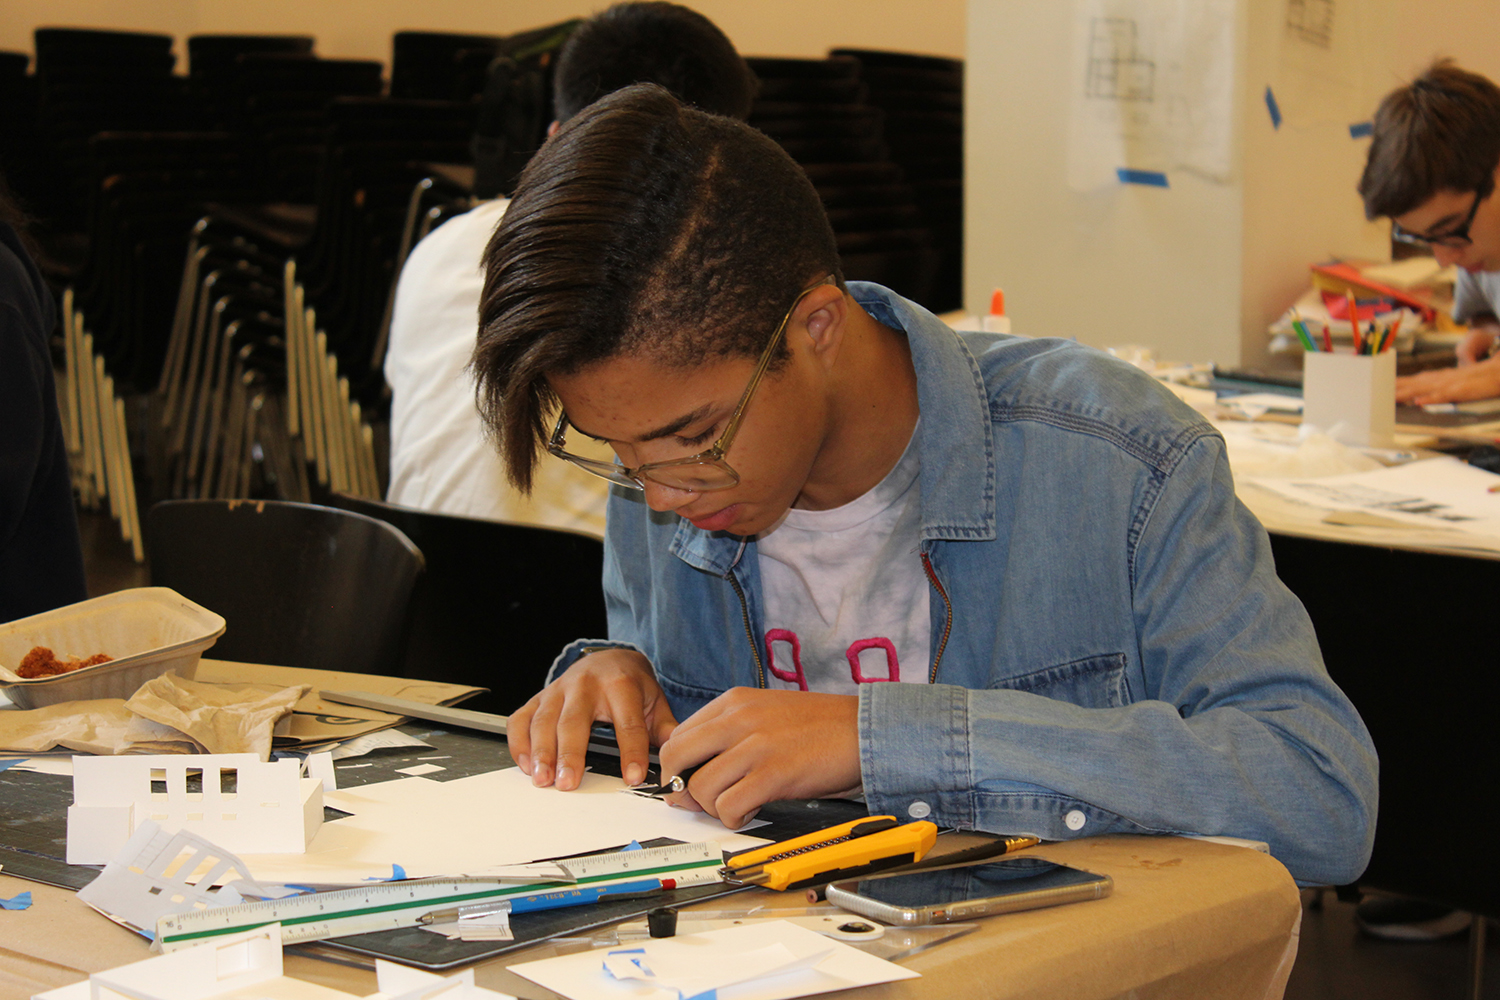 High school student working on architectural model